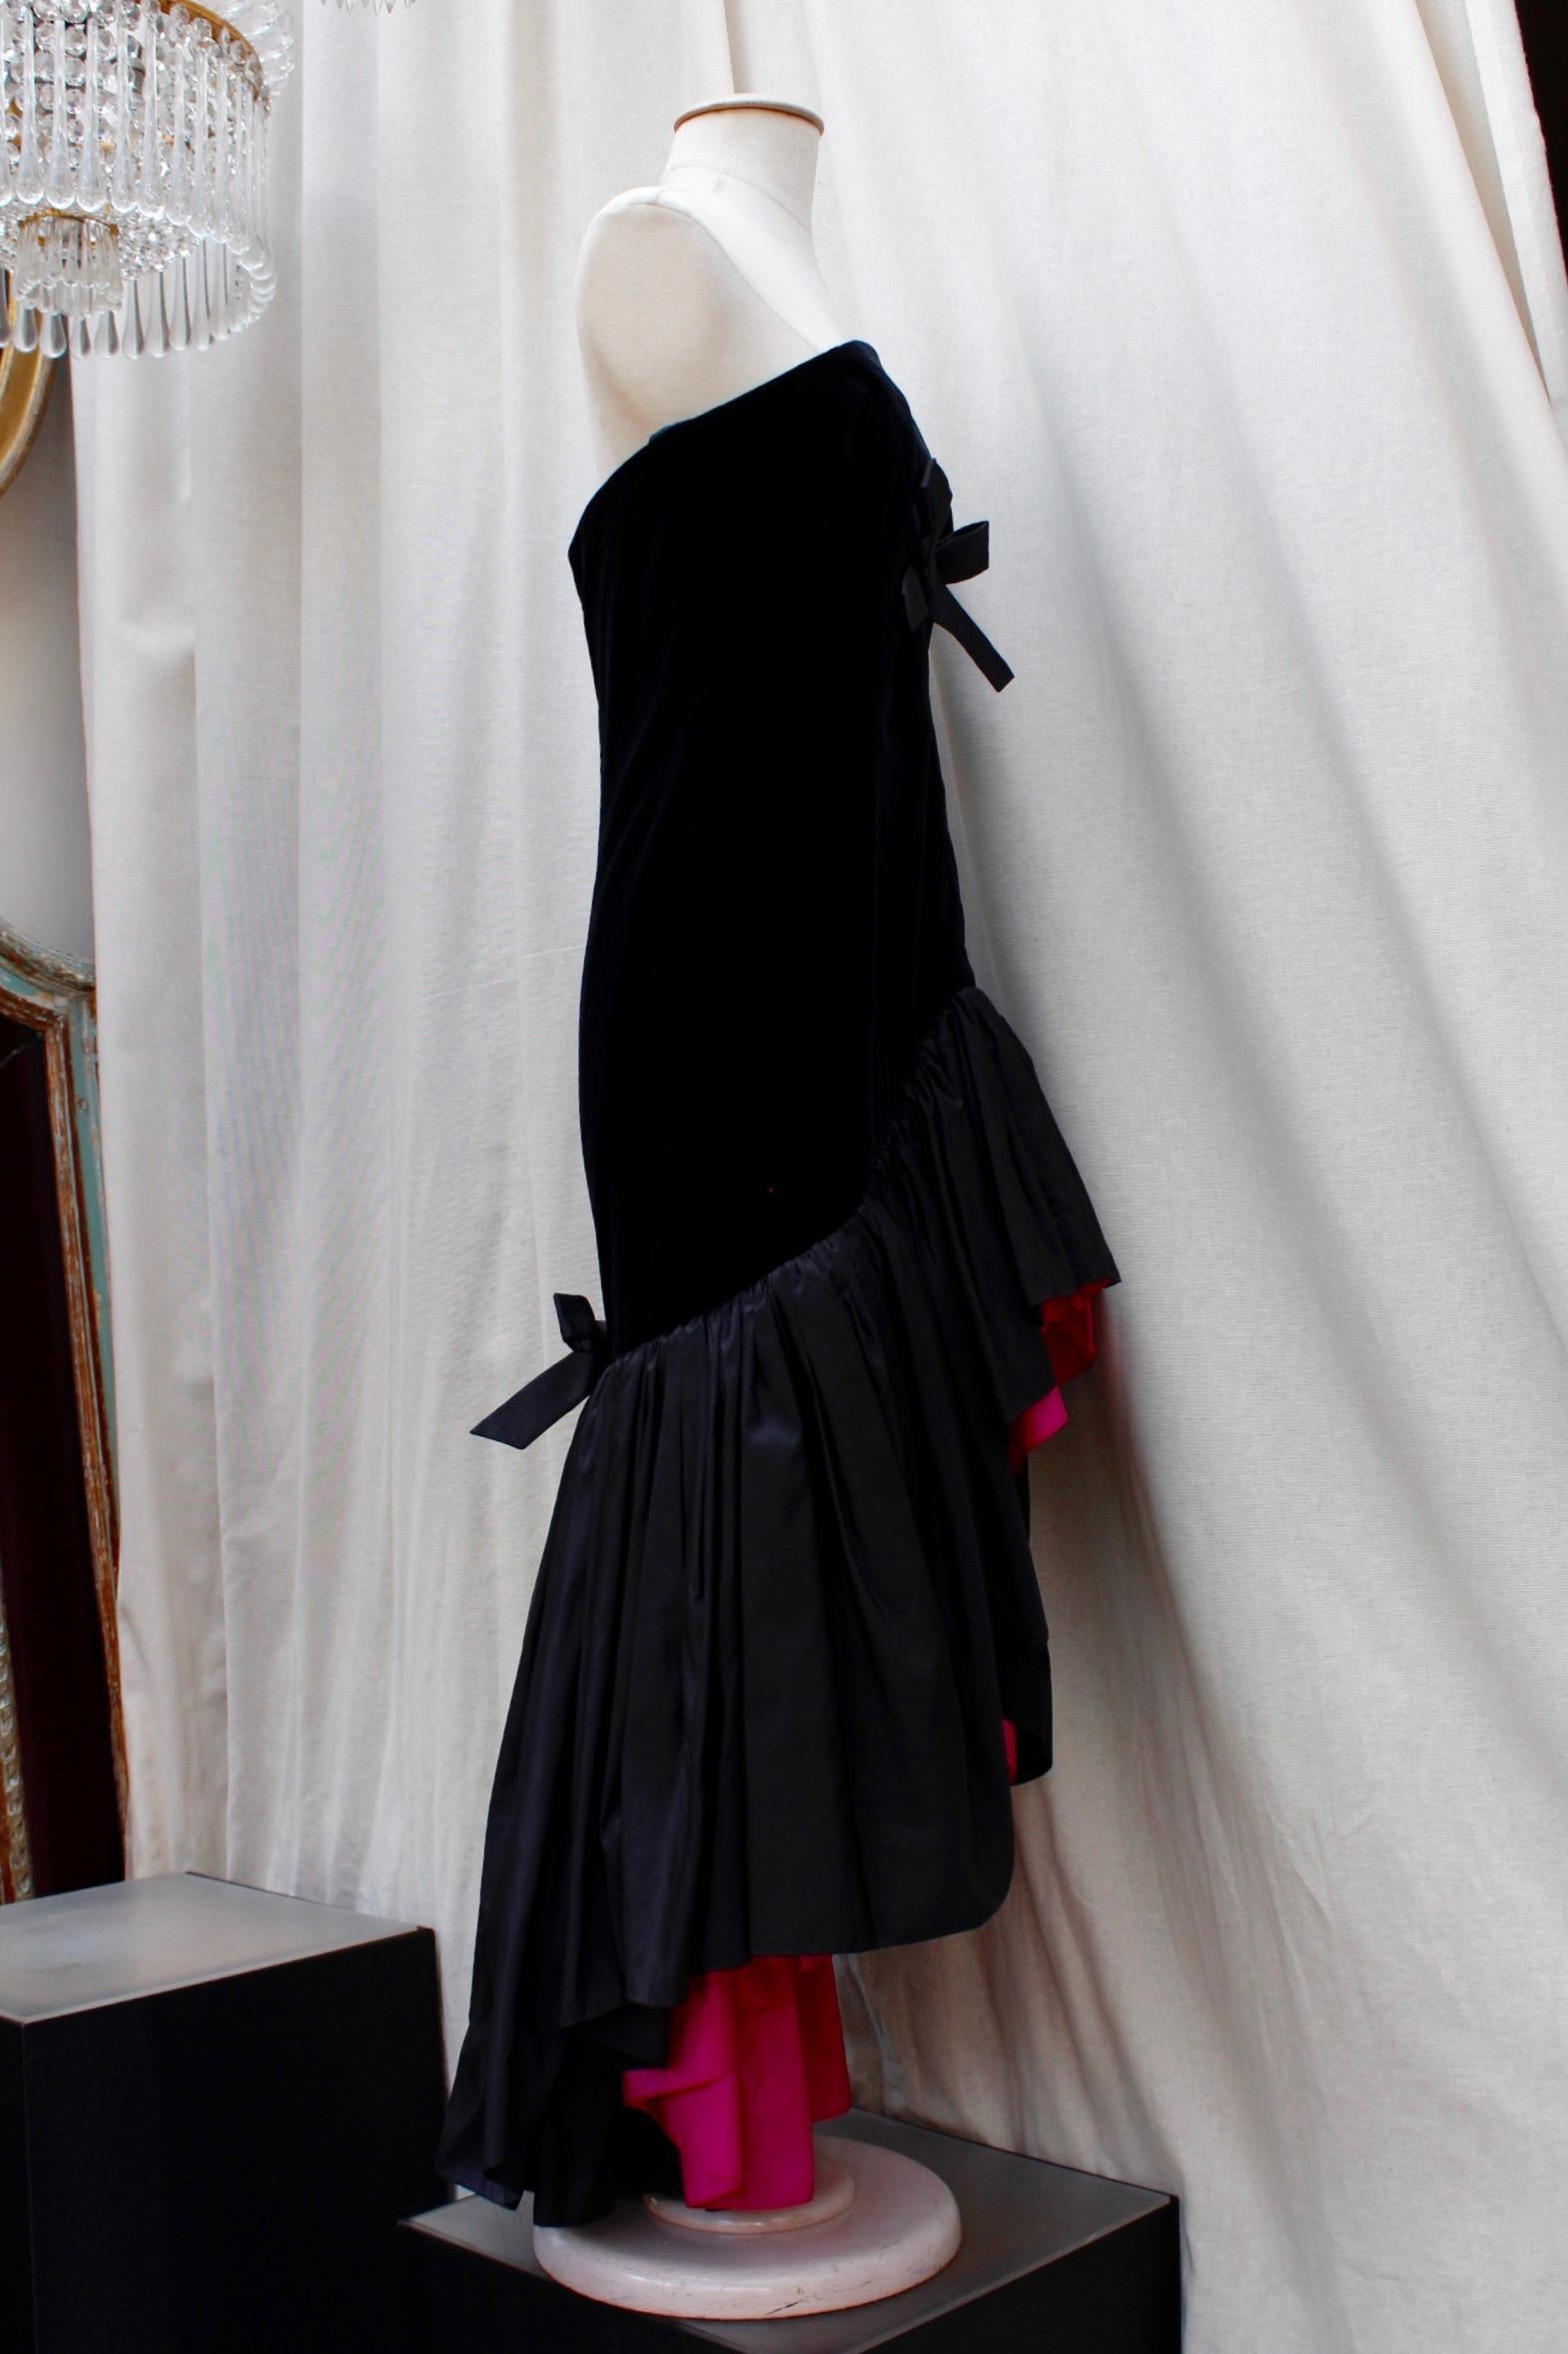 Yves Saint Laurent Rive Gauche (Made in France)  Exceptional bustier cocktail dress composed of layers of black tulle, in a 1950’s style; it is cinched by a wide black satin bow and features a very feminine heart-shaped neckline.

The dress is